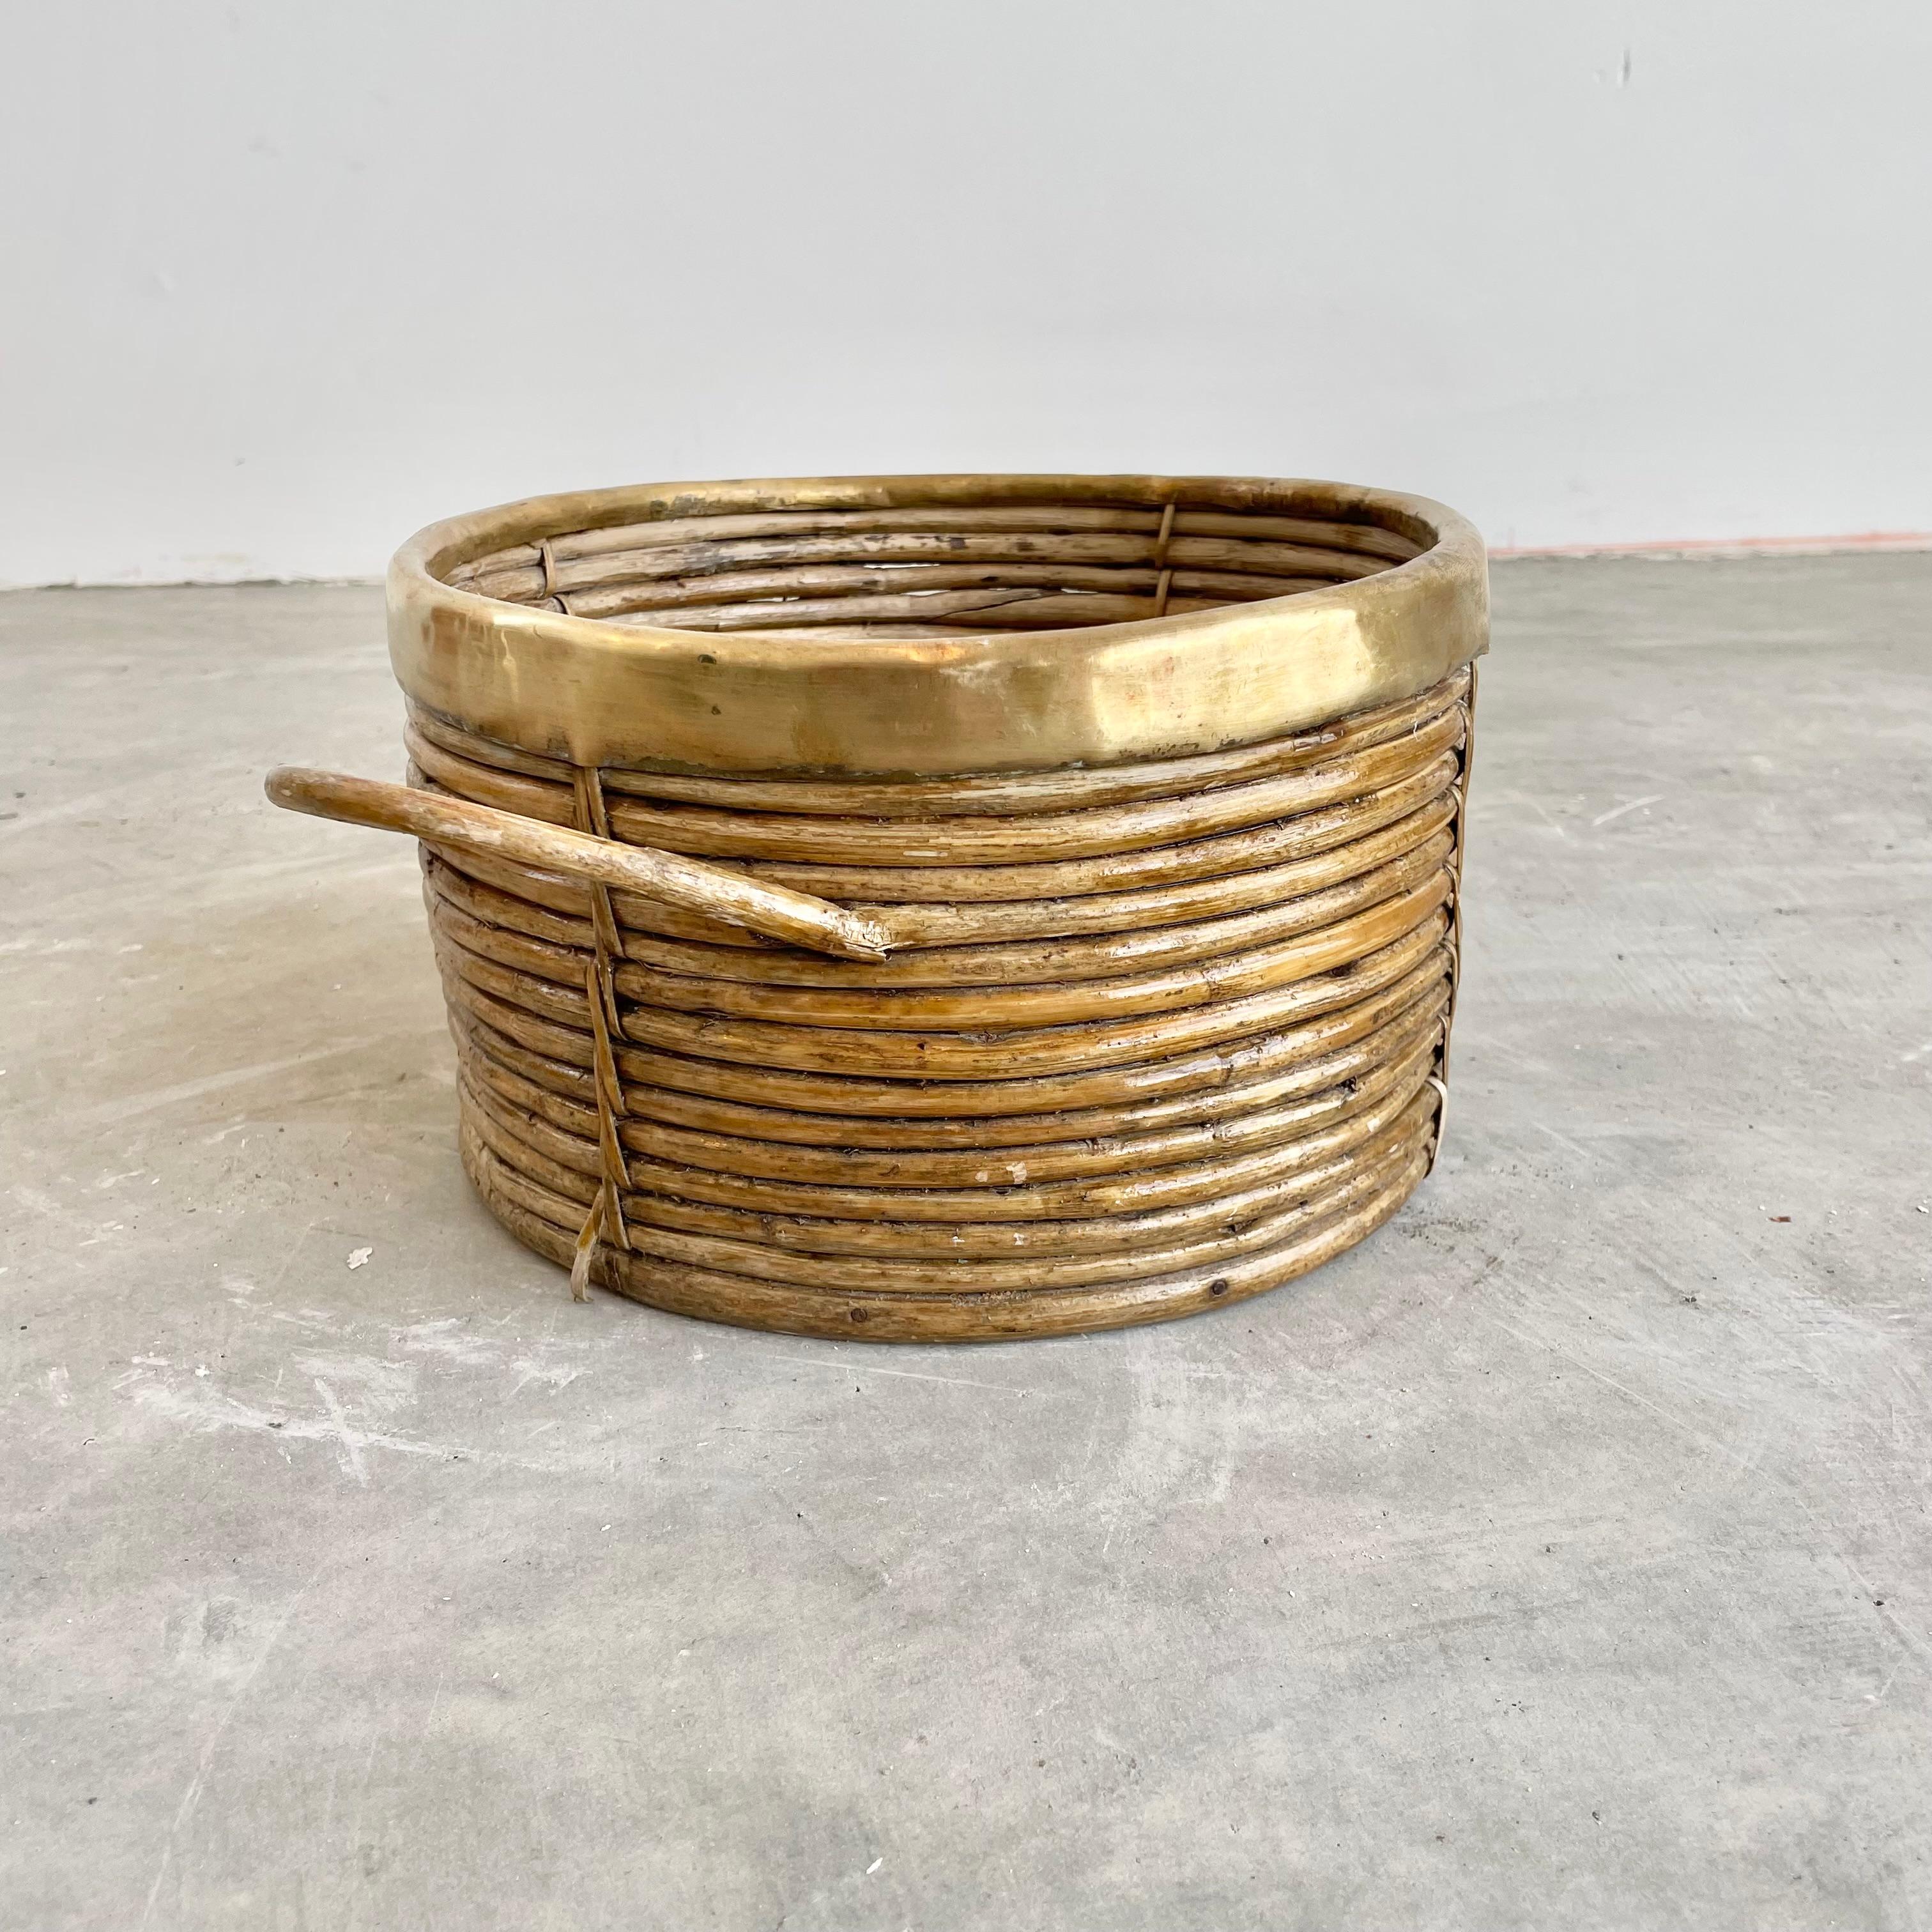 Fantastic bamboo bowl with brass trim and bamboo handles in the style of Gabriella Crespi. Great texture. Bamboo and rattan pieces are woven together with wicker ties as well as glued together. Bowl is sturdy and is able to hold heavy items as the